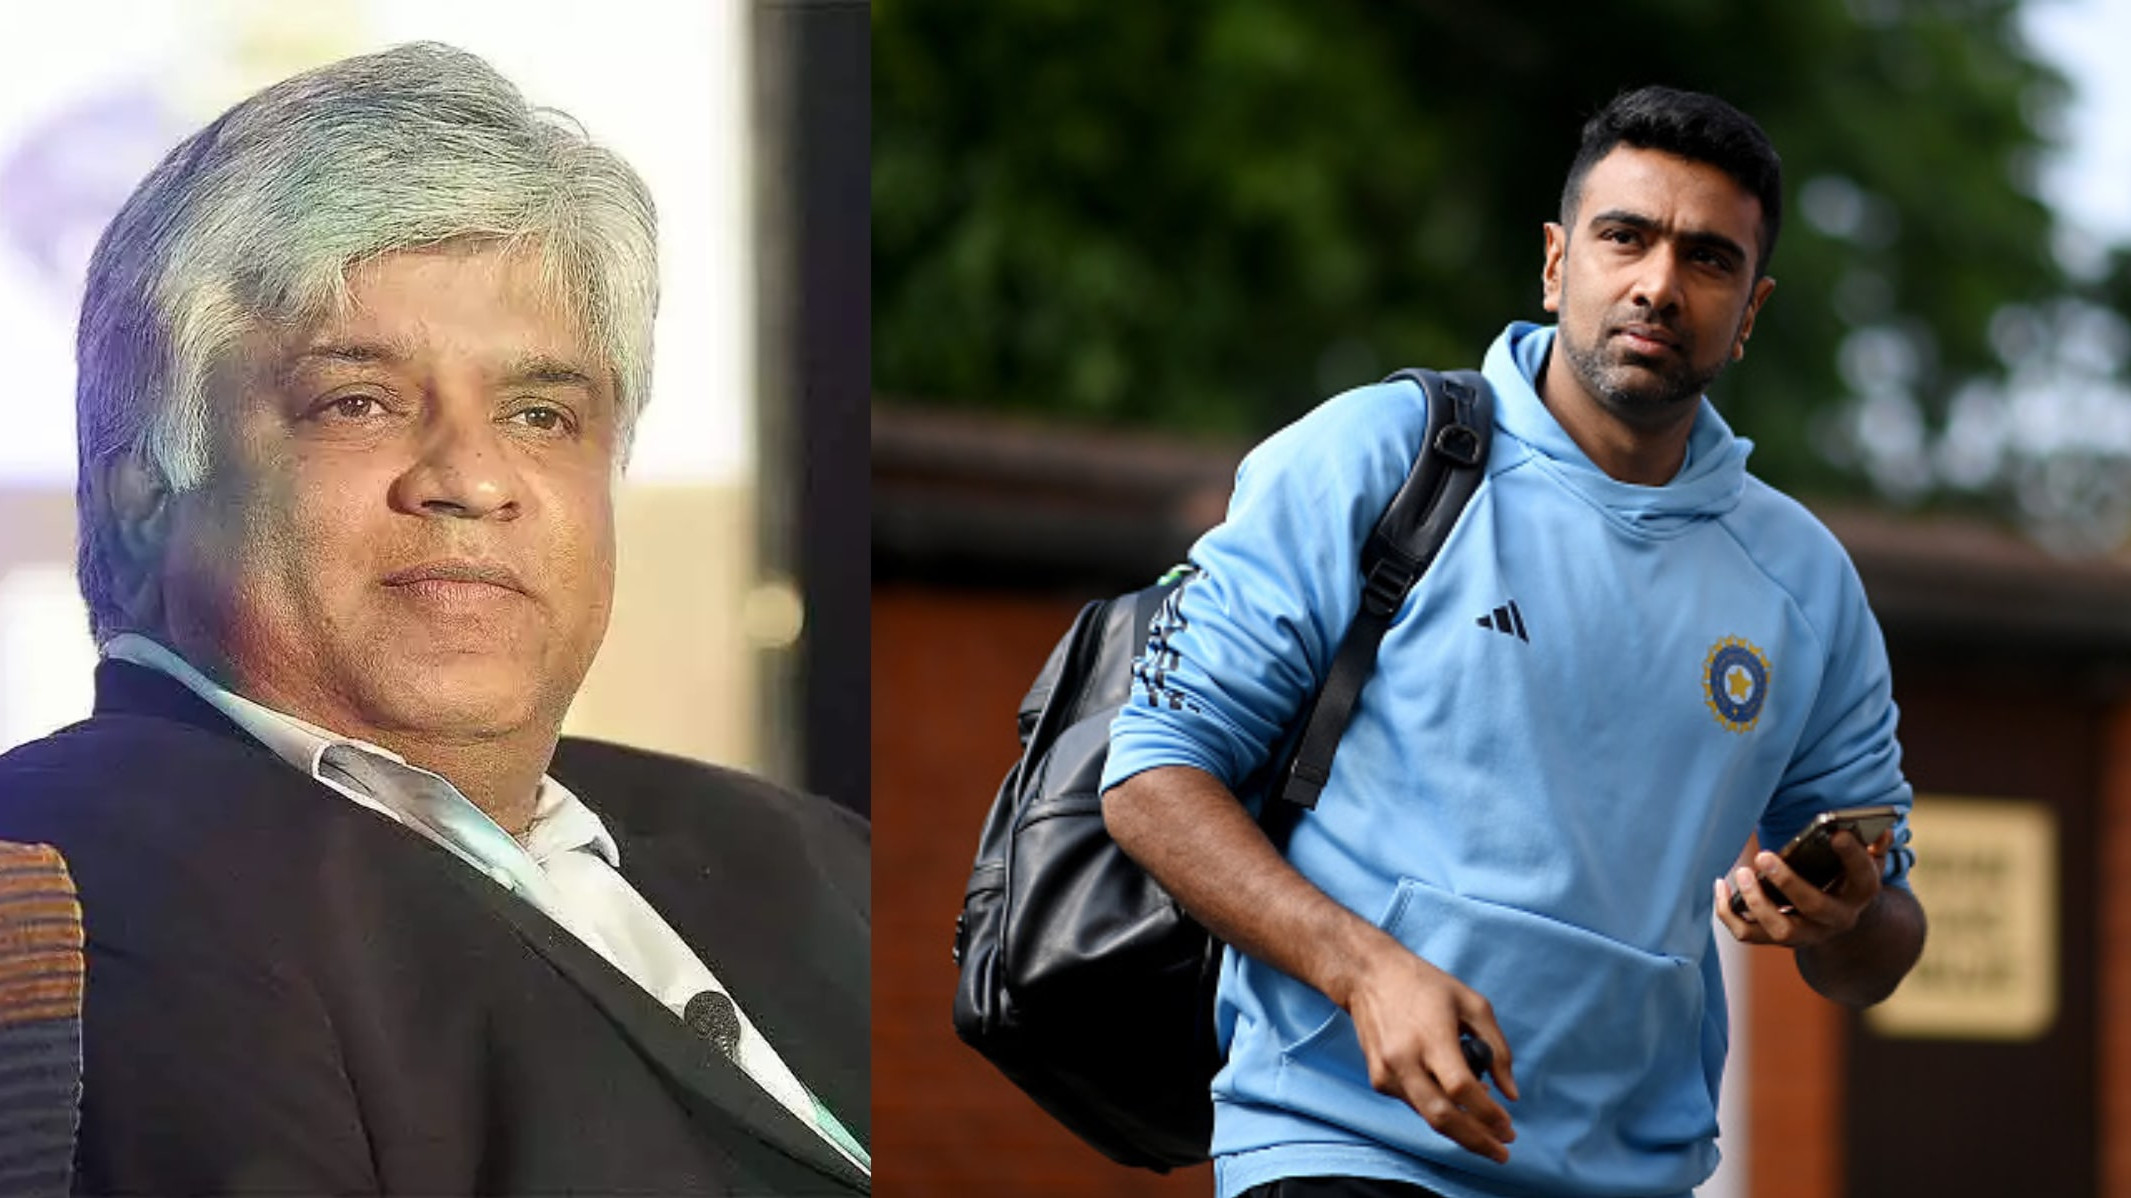 CWC 2023: “When he plays, he can be a match-winner for you”- Arjuna Ranatunga on why India needs R Ashwin in World Cup